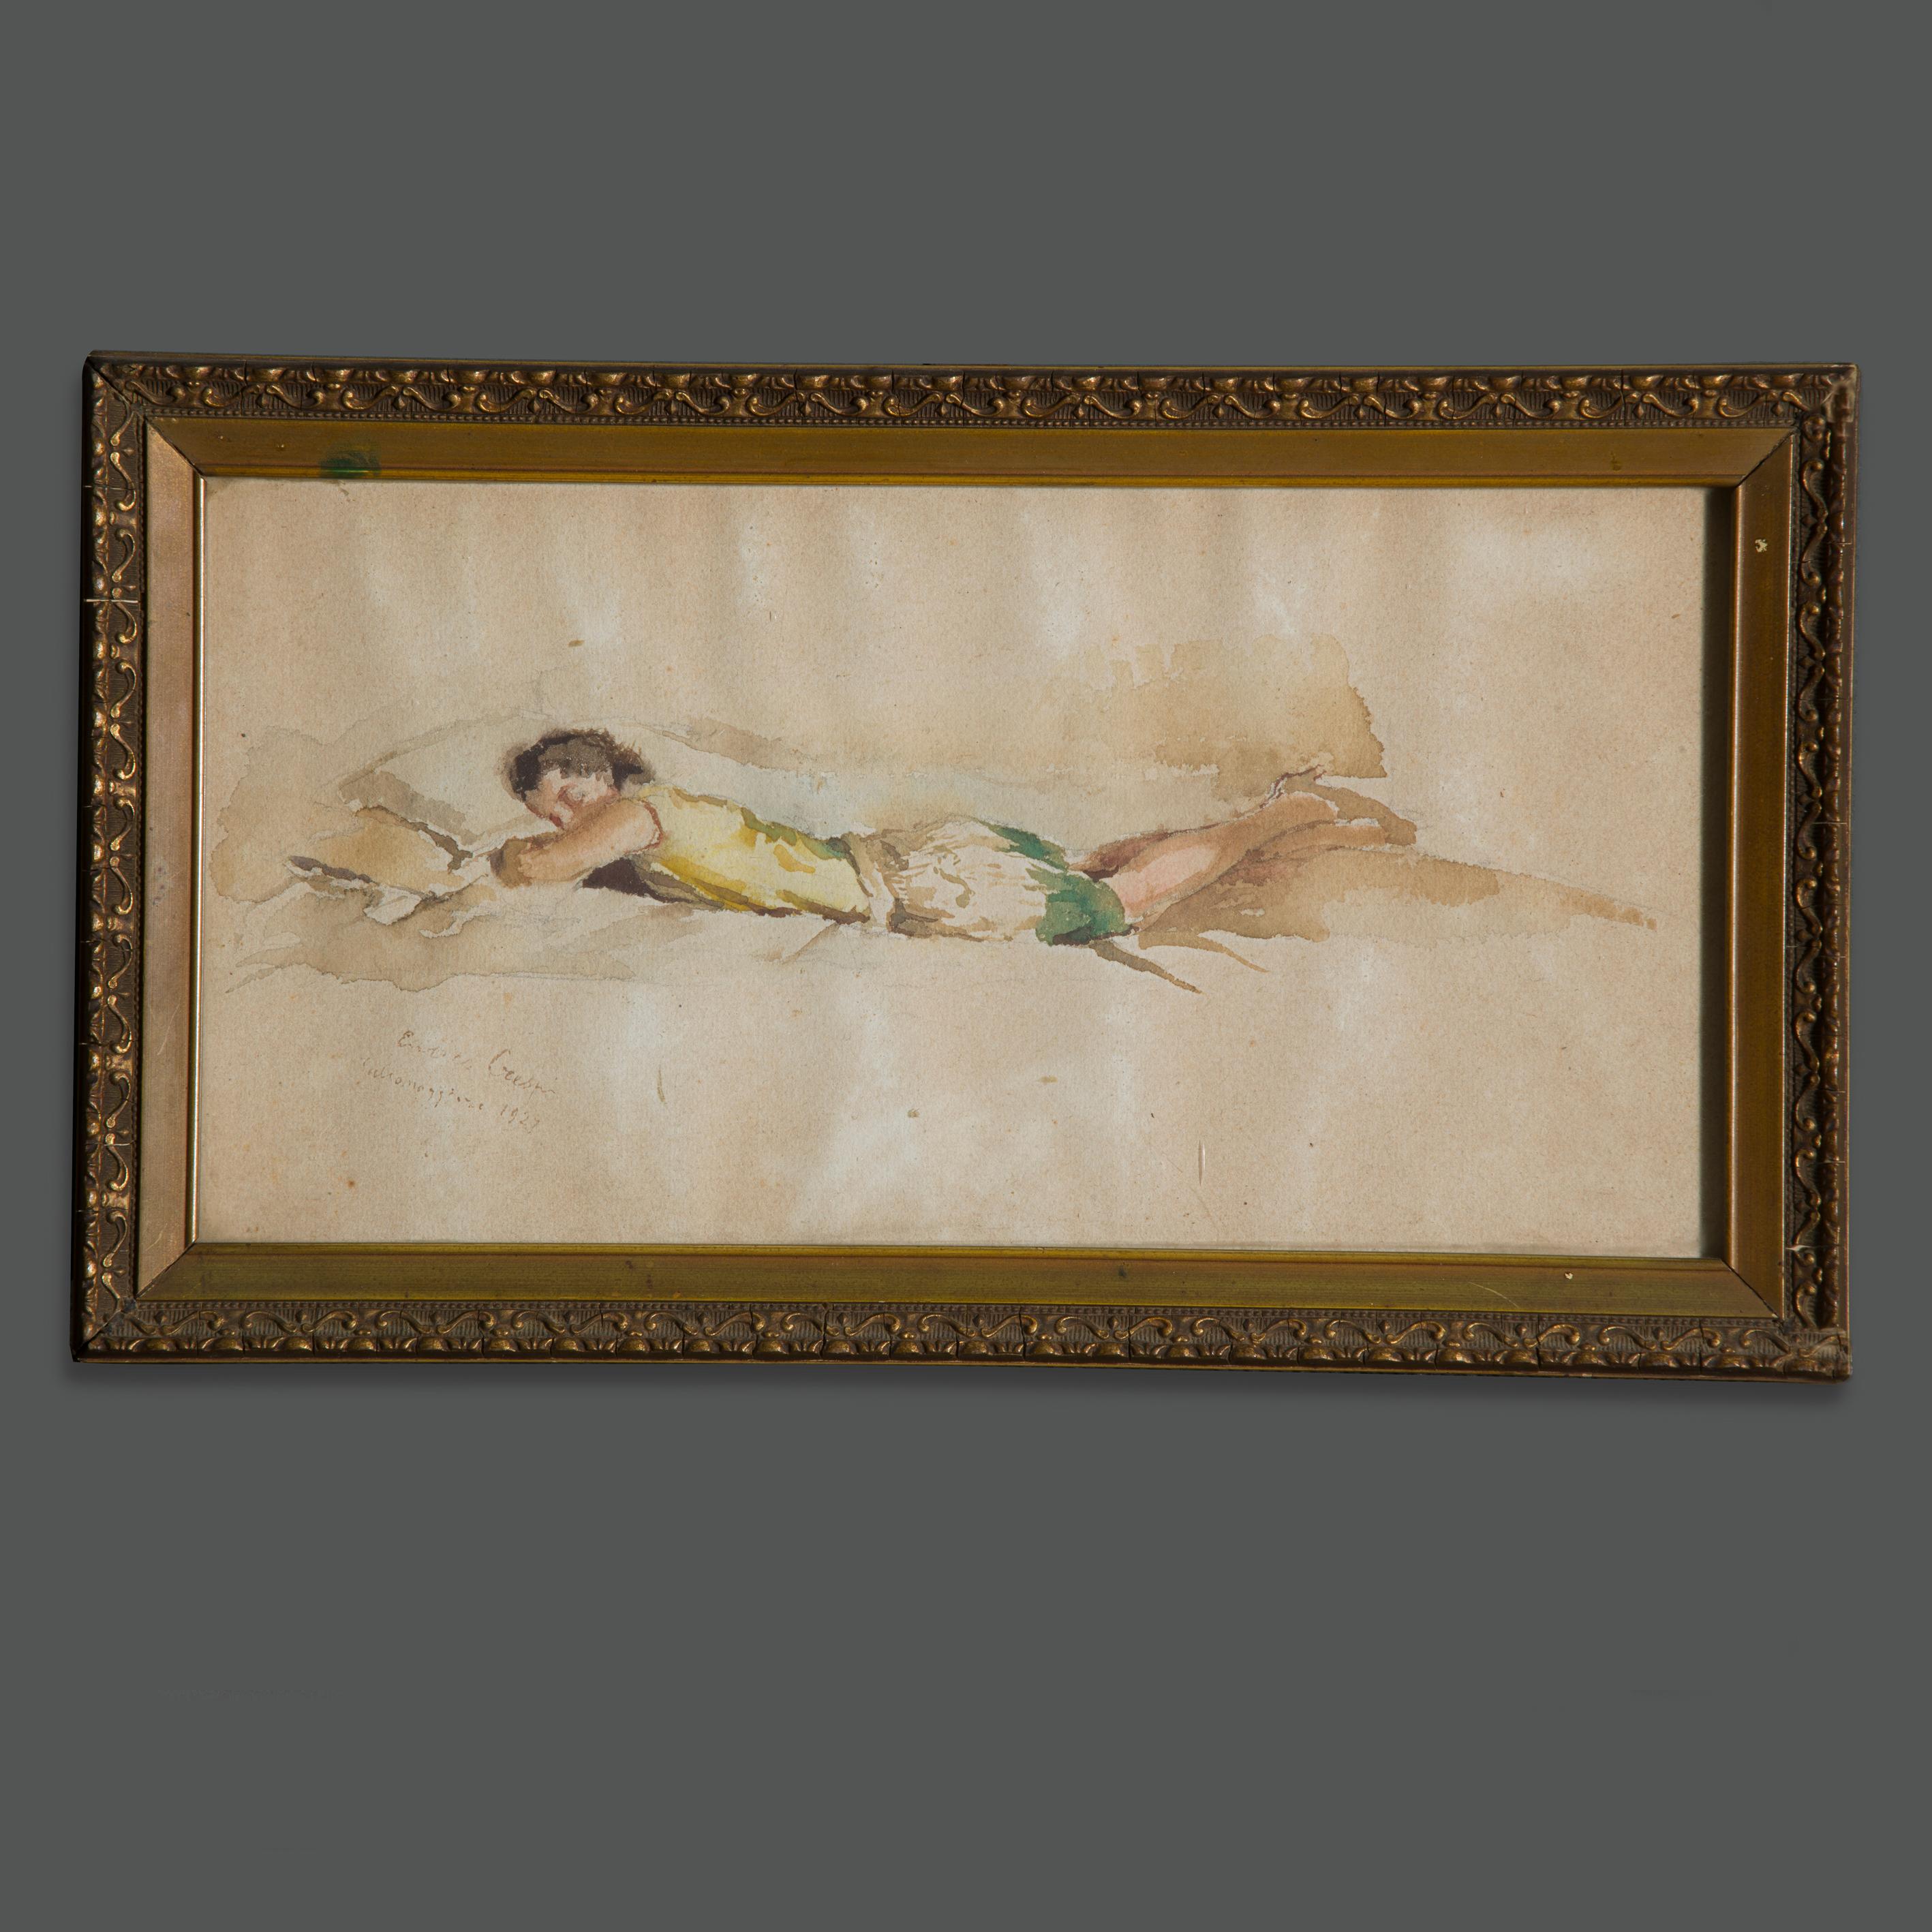 Beautiful and evocative watercolor technique painting by the great Milanese school artist Enrico Crespi
It depicts a young woman lying dreamily on her bed.
Most likely this is a young scion of Milanese high society, as Crespi was wont to do.
Signed